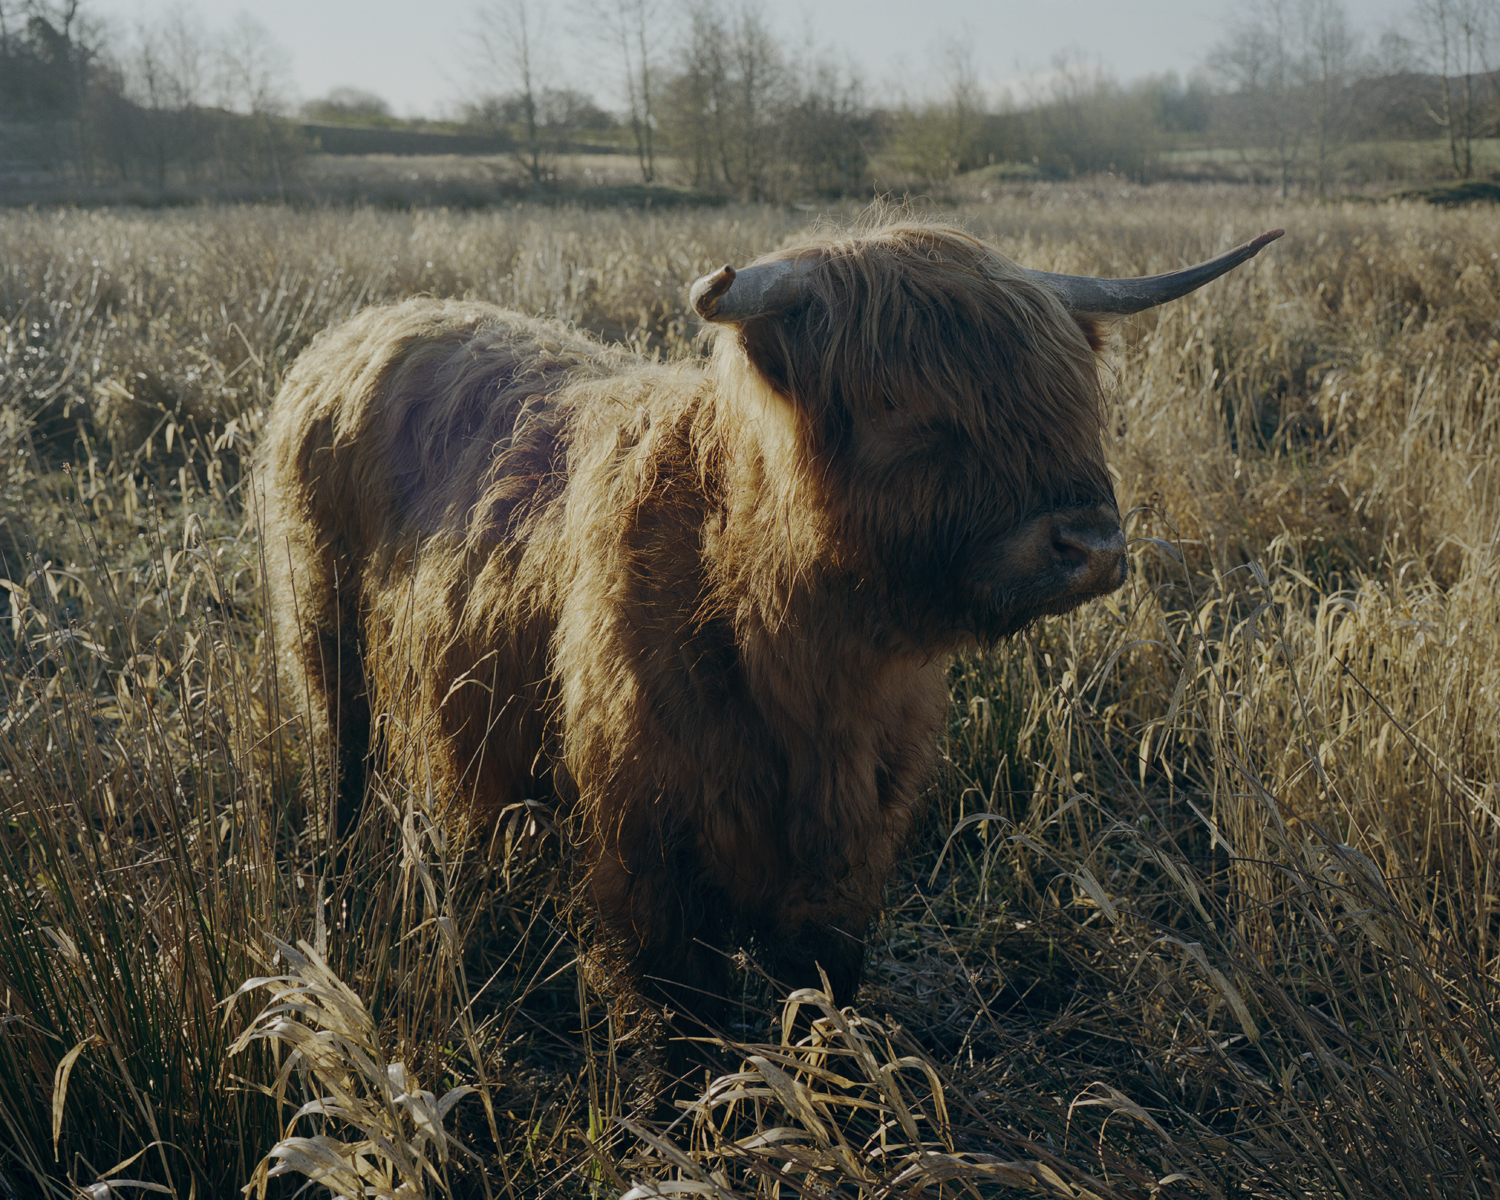 A Scottish Highland cow bred in Northumberland, England.